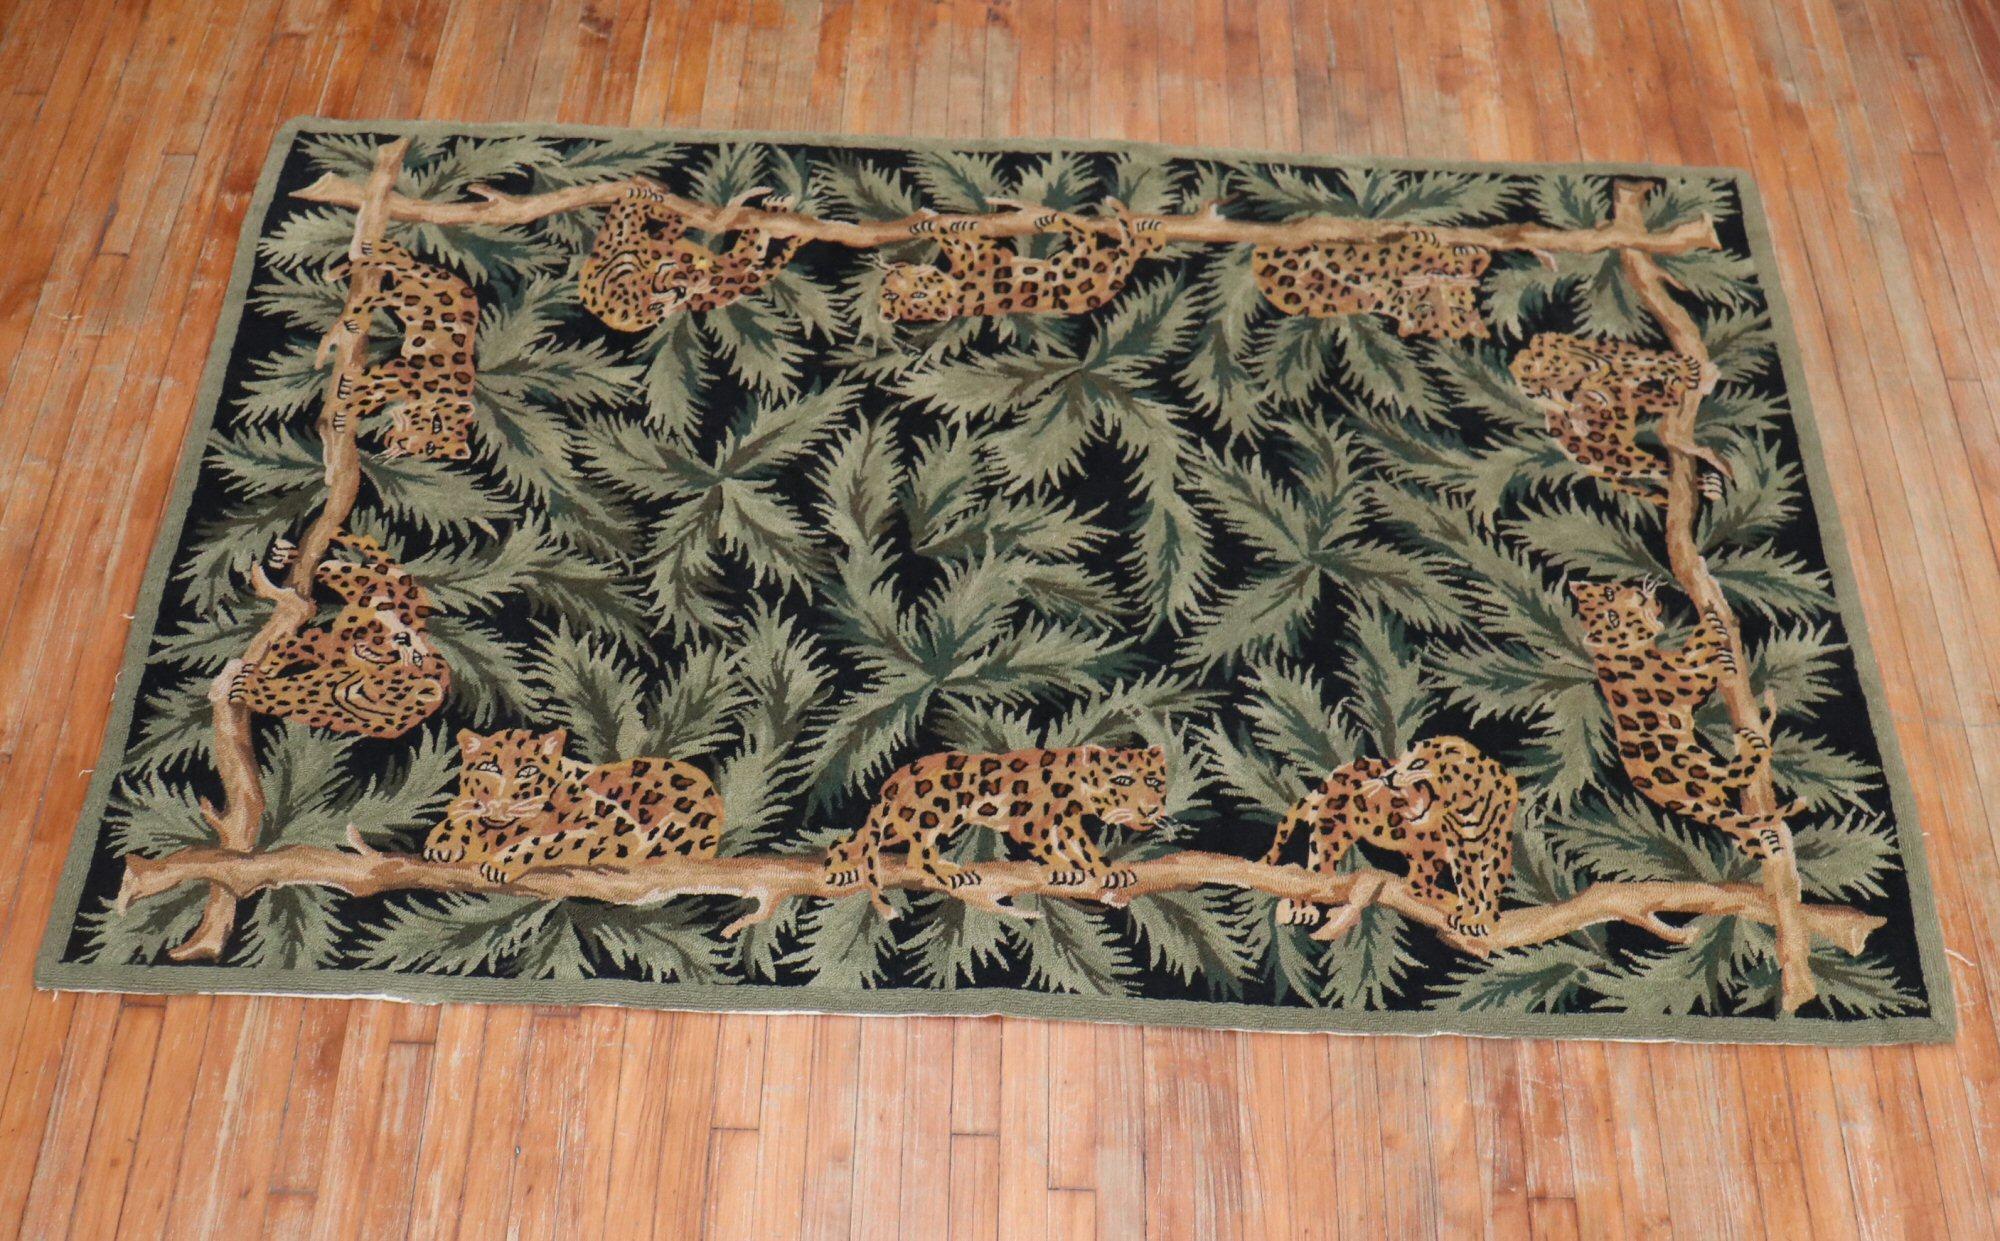 A late 20th century one of a kind Hooked Rug with 10 cheetahs on a 4 long branches on a green and black large leaf pattern

Measures: 5' x 8'.
  